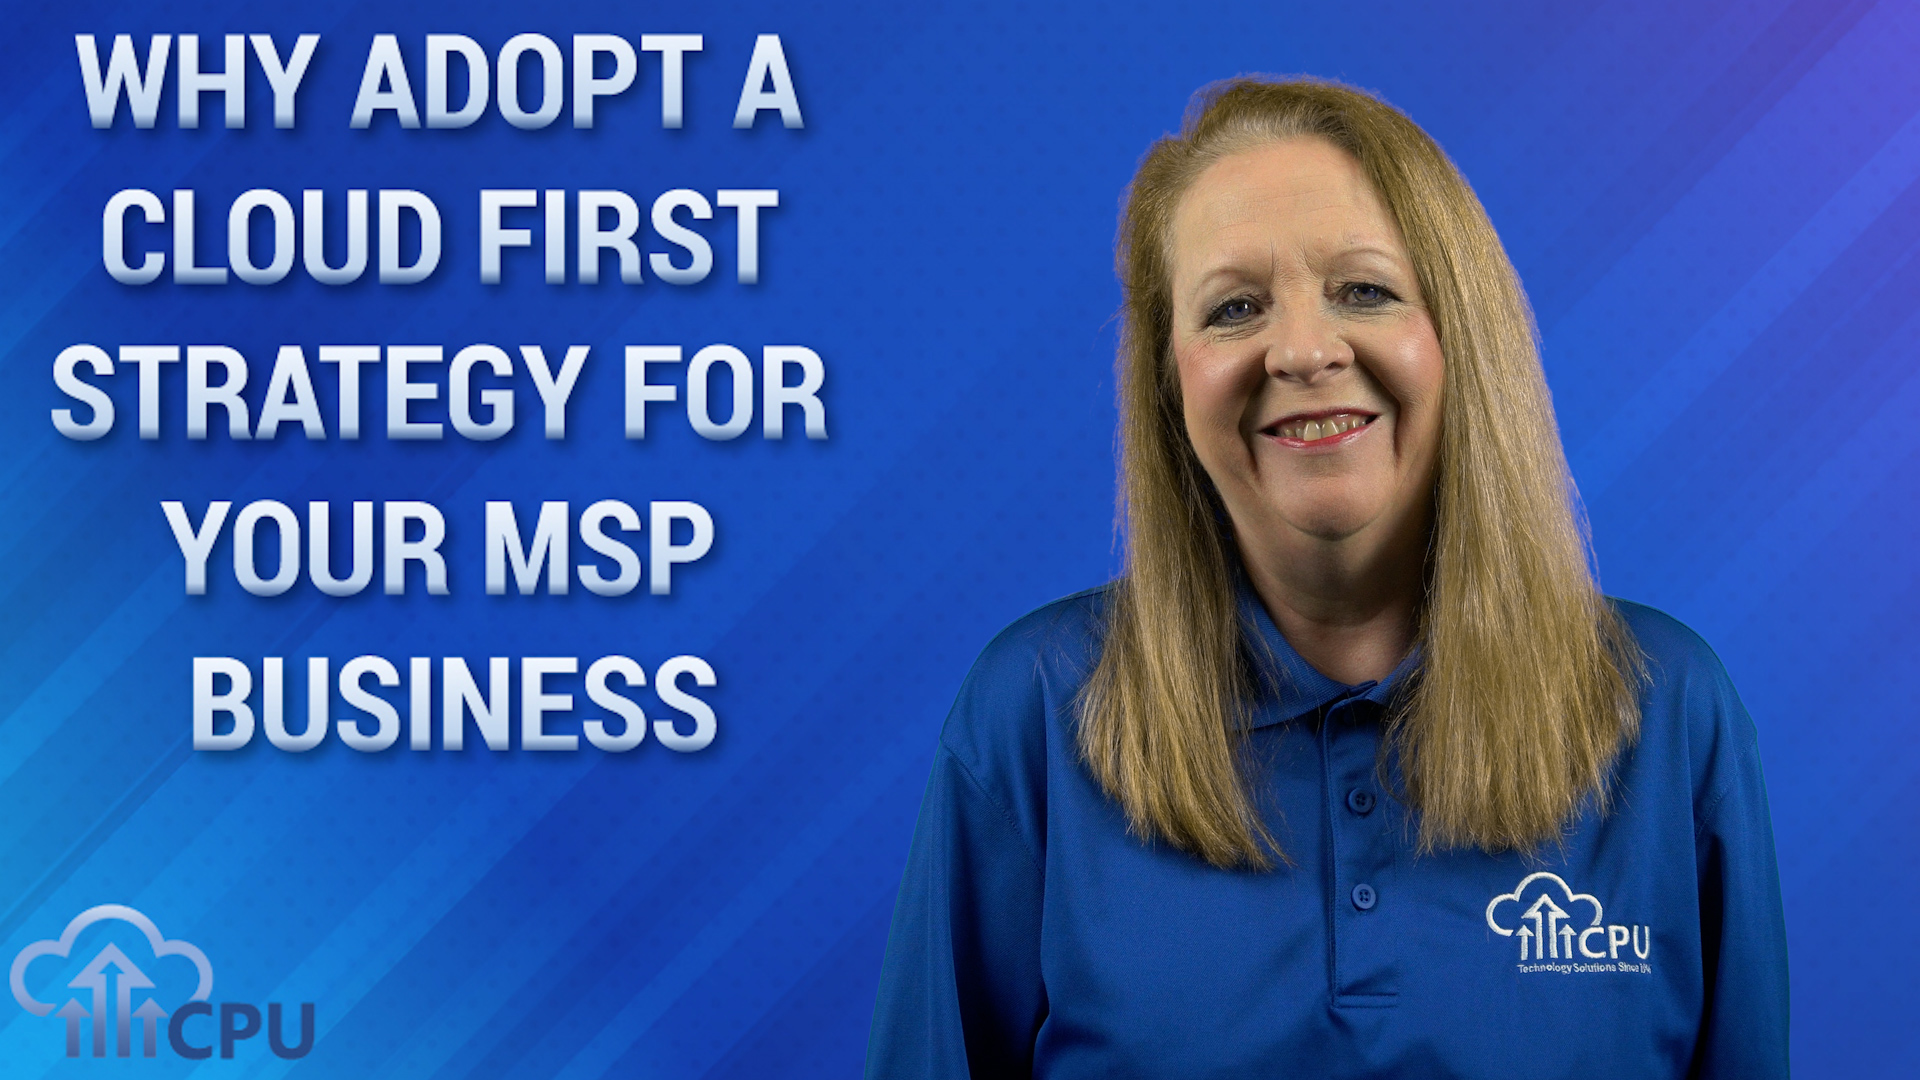 Why adopt a cloud first strategy for your MSP business